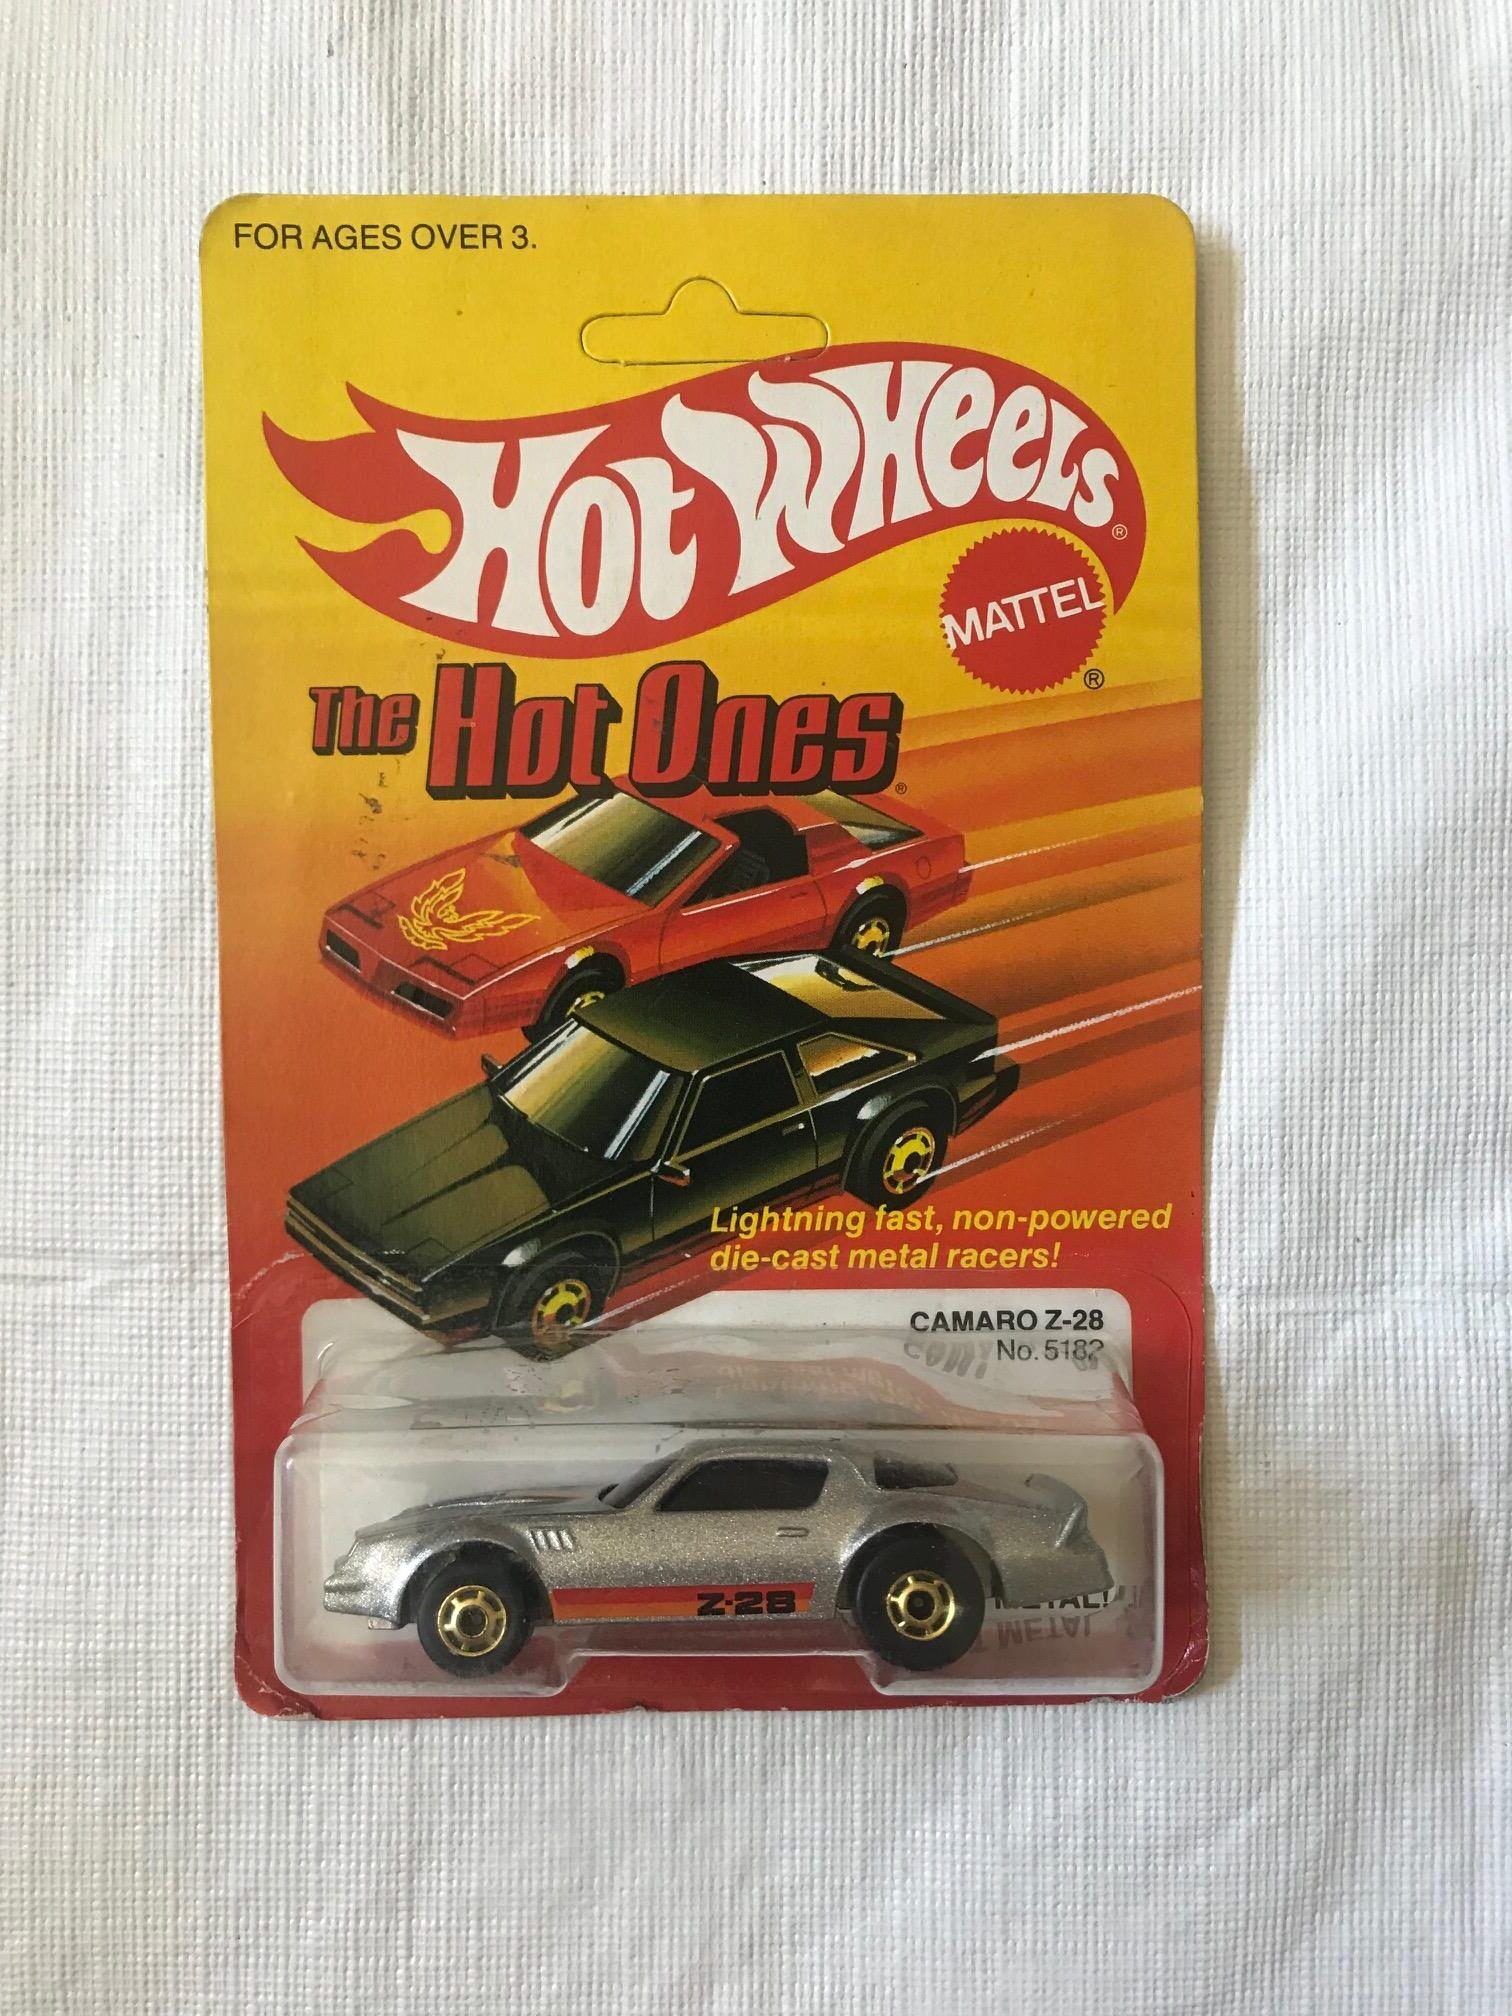 Interested in Hot Wheels?